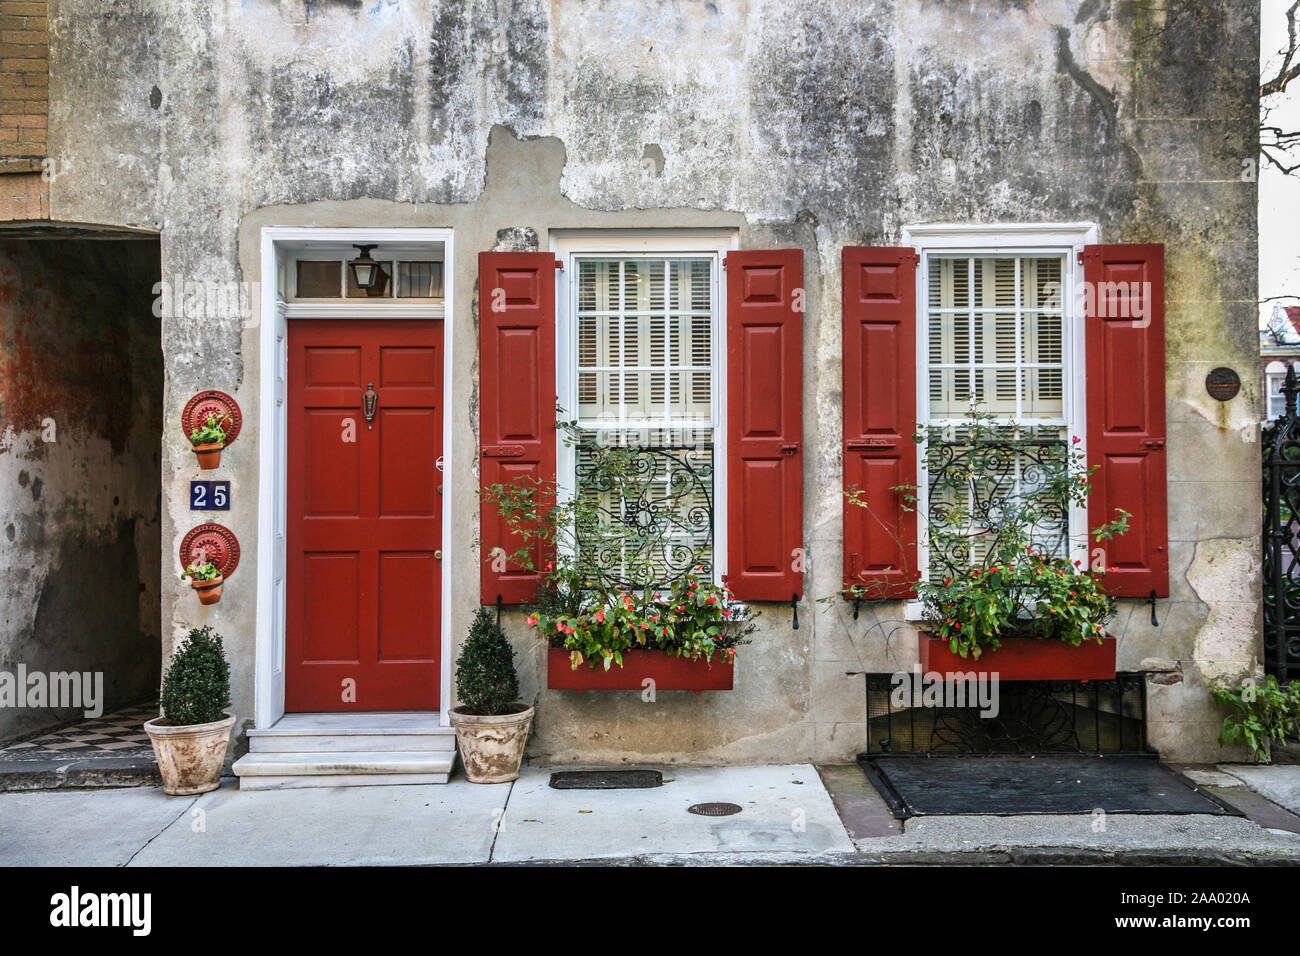 House windows with red shutters and red front door, Charleston, South Carolina, SC, USA, US, vintage window box garden plants house door image America Stock Photo